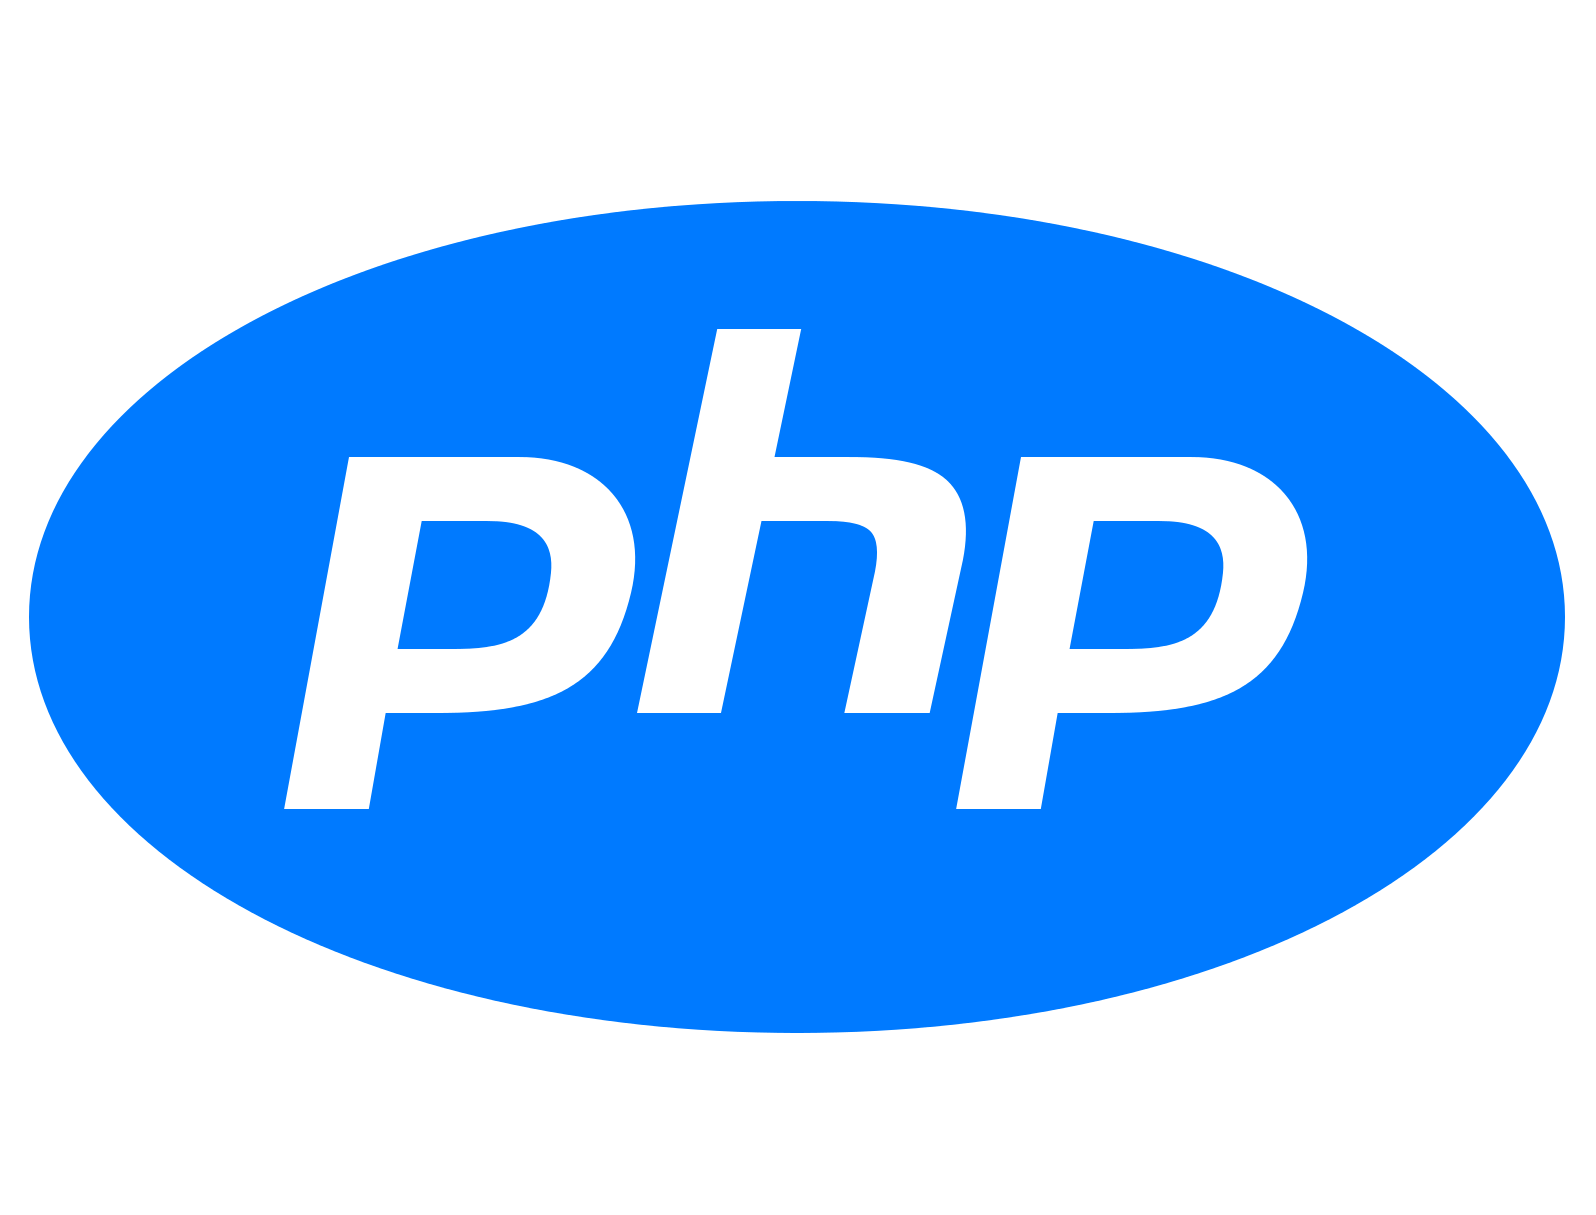 Php logo. Значок php. Php логотип. Логотип php без фона. Php ярлык.